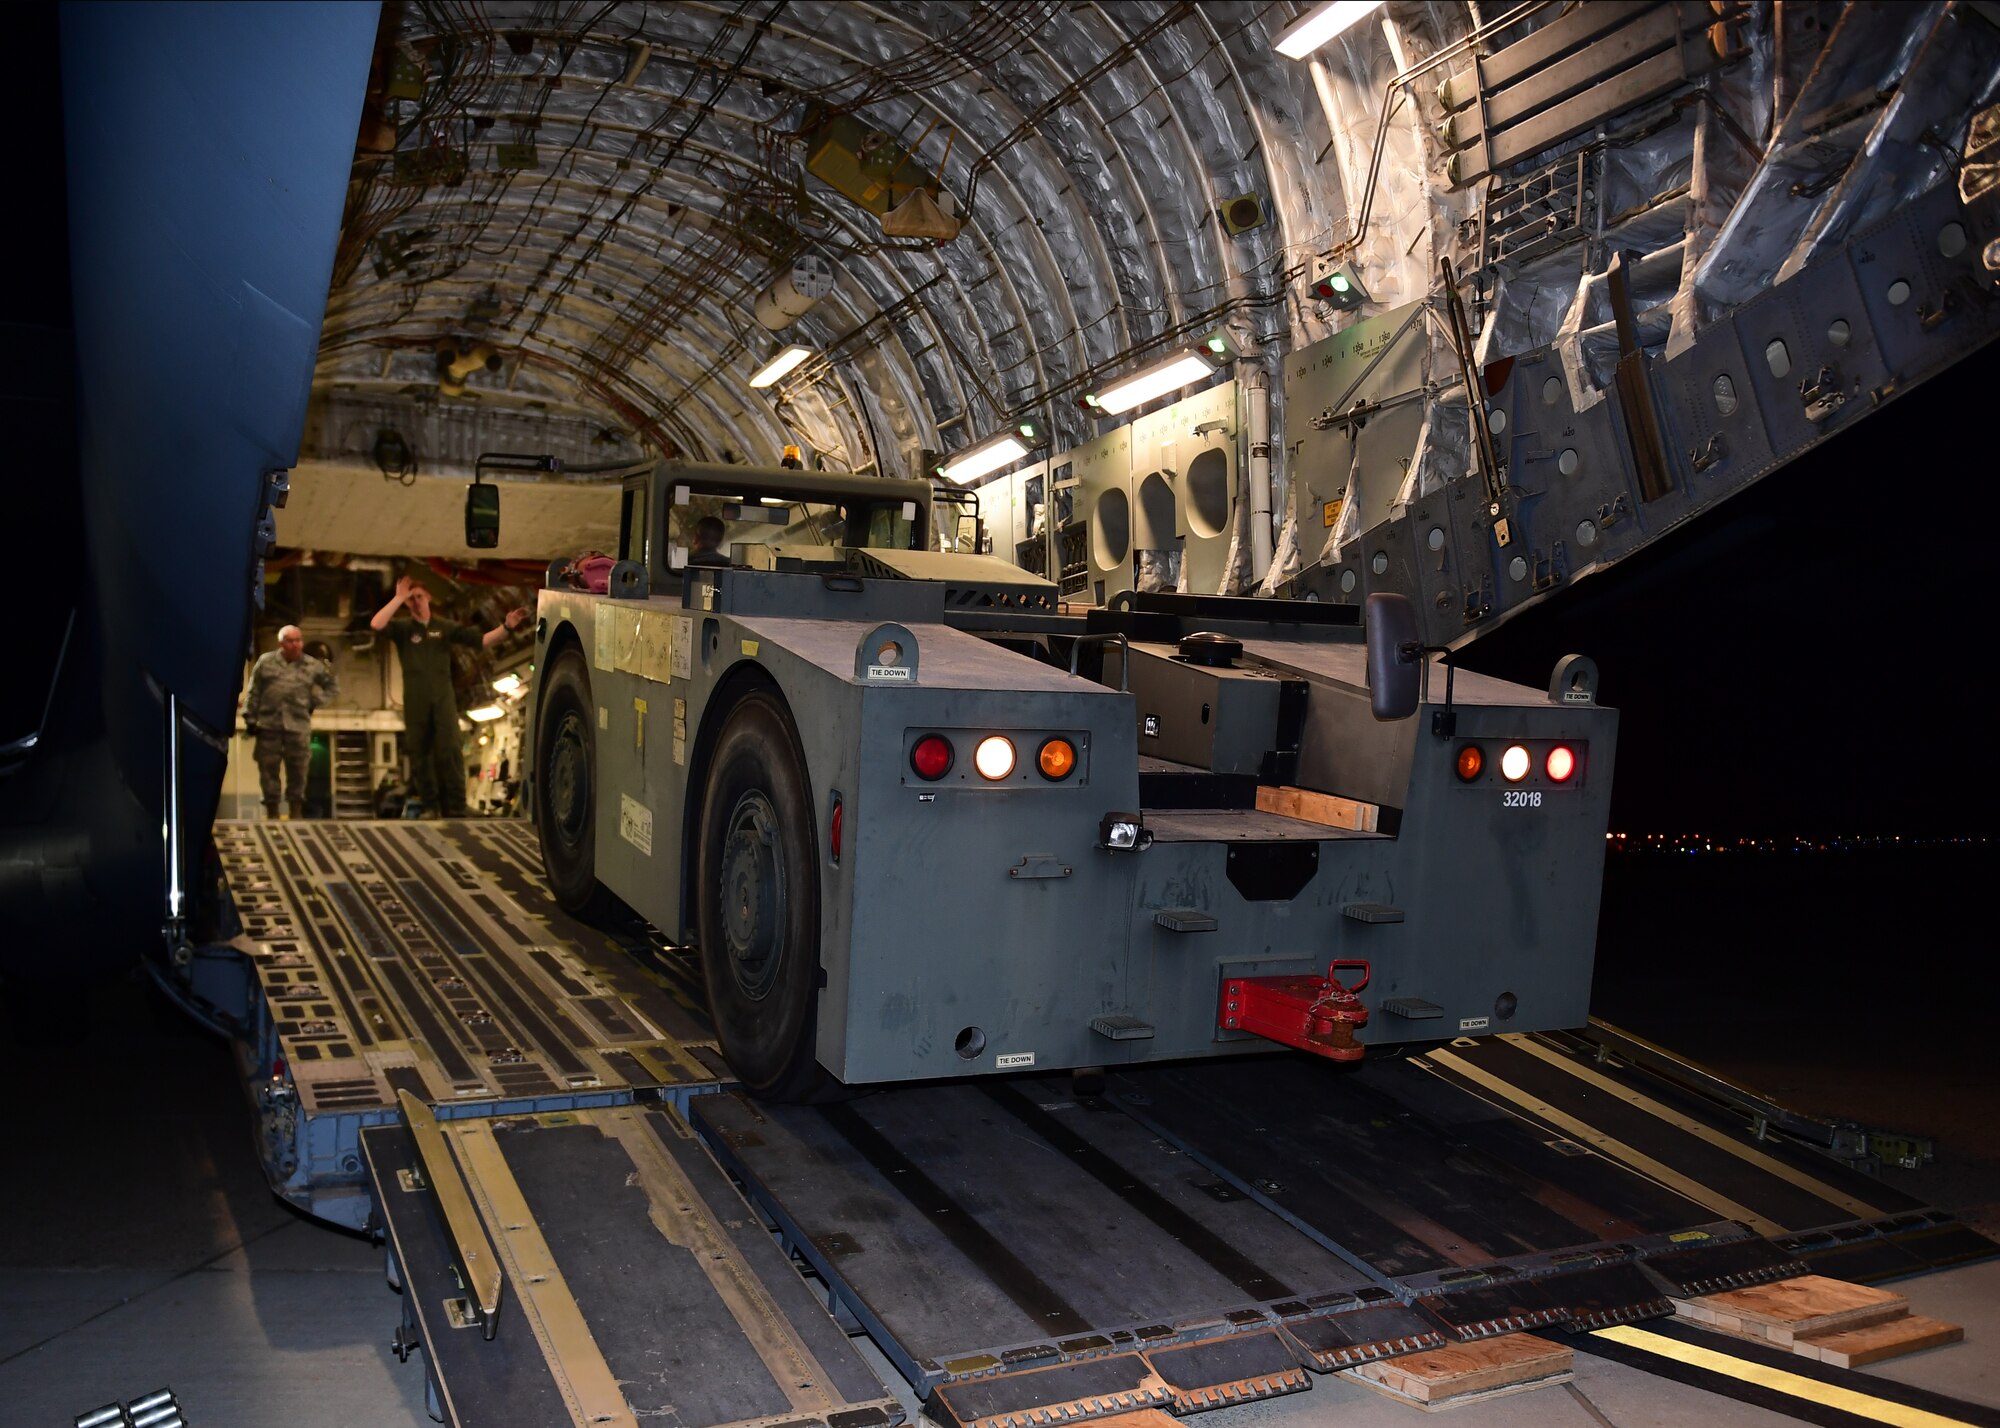 Airmen assigned to the 911th Airlift Wing drive a aircraft tug, which is used to move extremely heavy aircraft,onto the flightline at the Pittsburgh International Airport Air Reserve Station, Pennsylvania, April 11, 2019. Their mission to retrieve the aircraft tug was a success and it arrived safely to the 911th AW, its new home.(U.S. Air Force Photo by Senior Airman Grace Thomson)